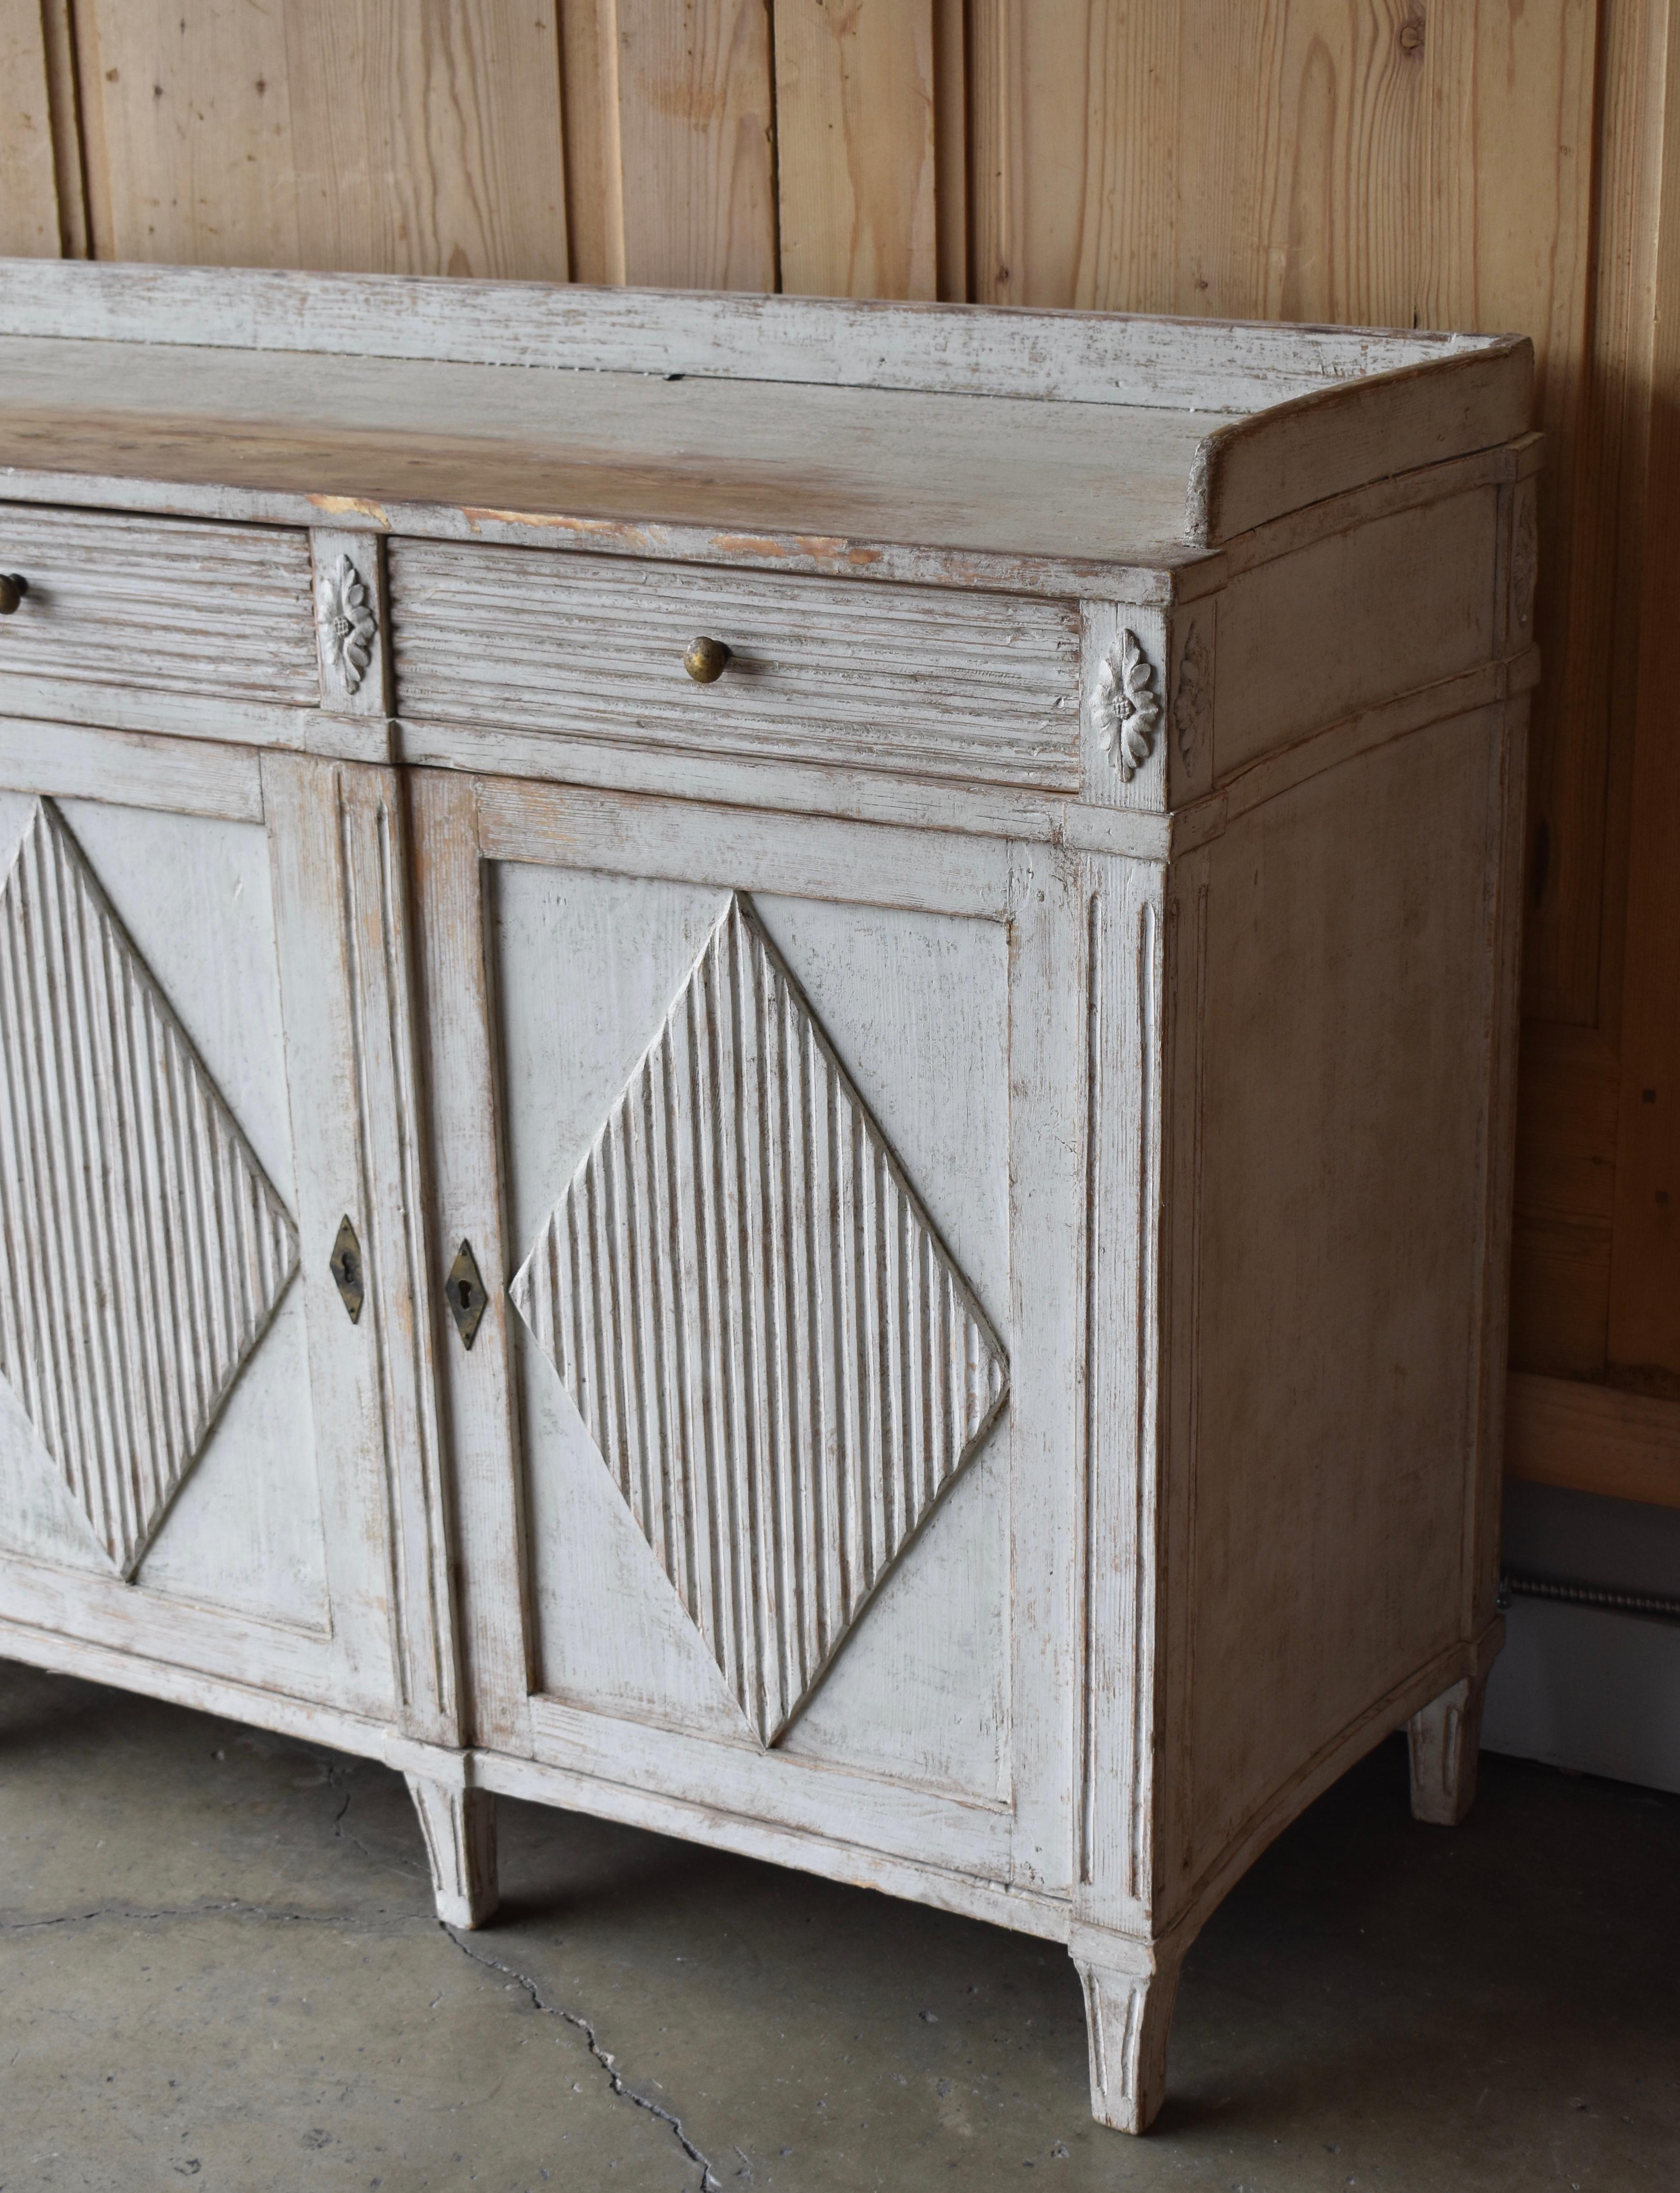 Early 19th century Swedish Gustavian style painted three door sideboard. Beautiful curved sides with wonderful three hand-carved drawers over three reeded front paneled doors. Each door is adorned with a diamond pattern. The top is surrounded with a